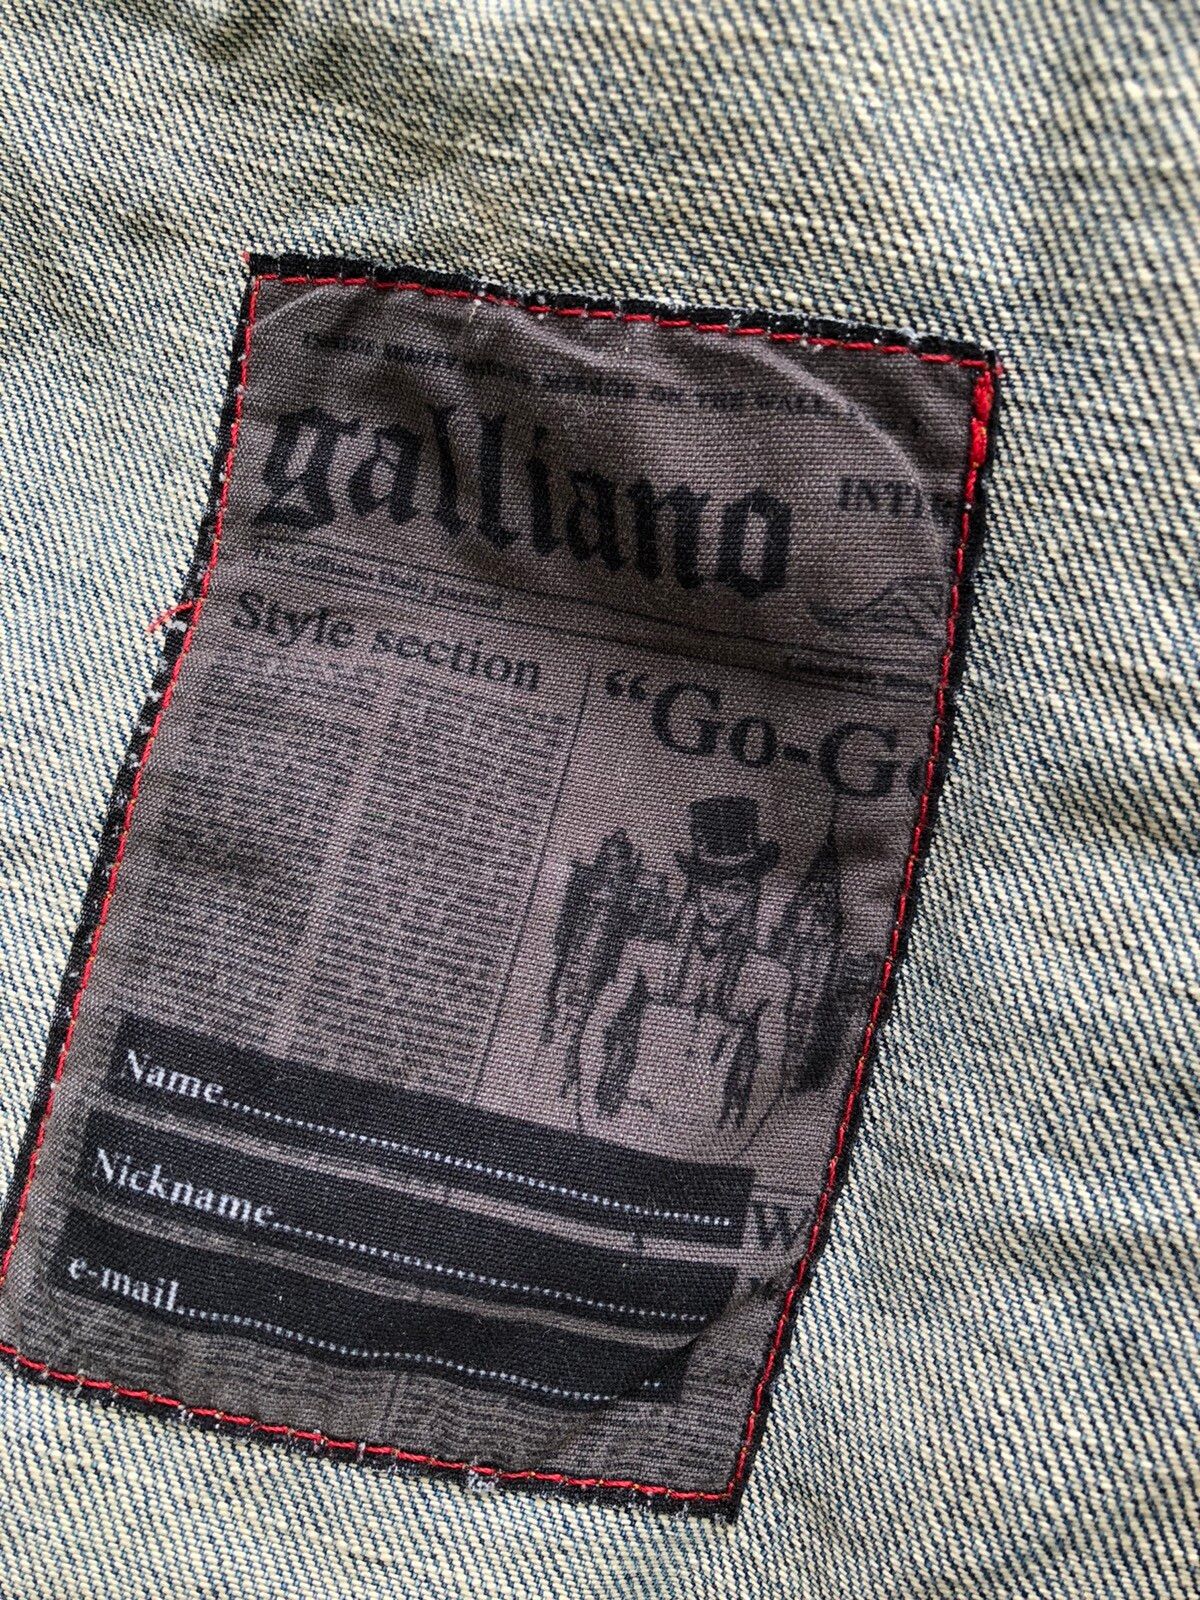 Archival Clothing Archived Galliano Poetic Printed Blue Washed Denim Trucker Size US M / EU 48-50 / 2 - 16 Thumbnail